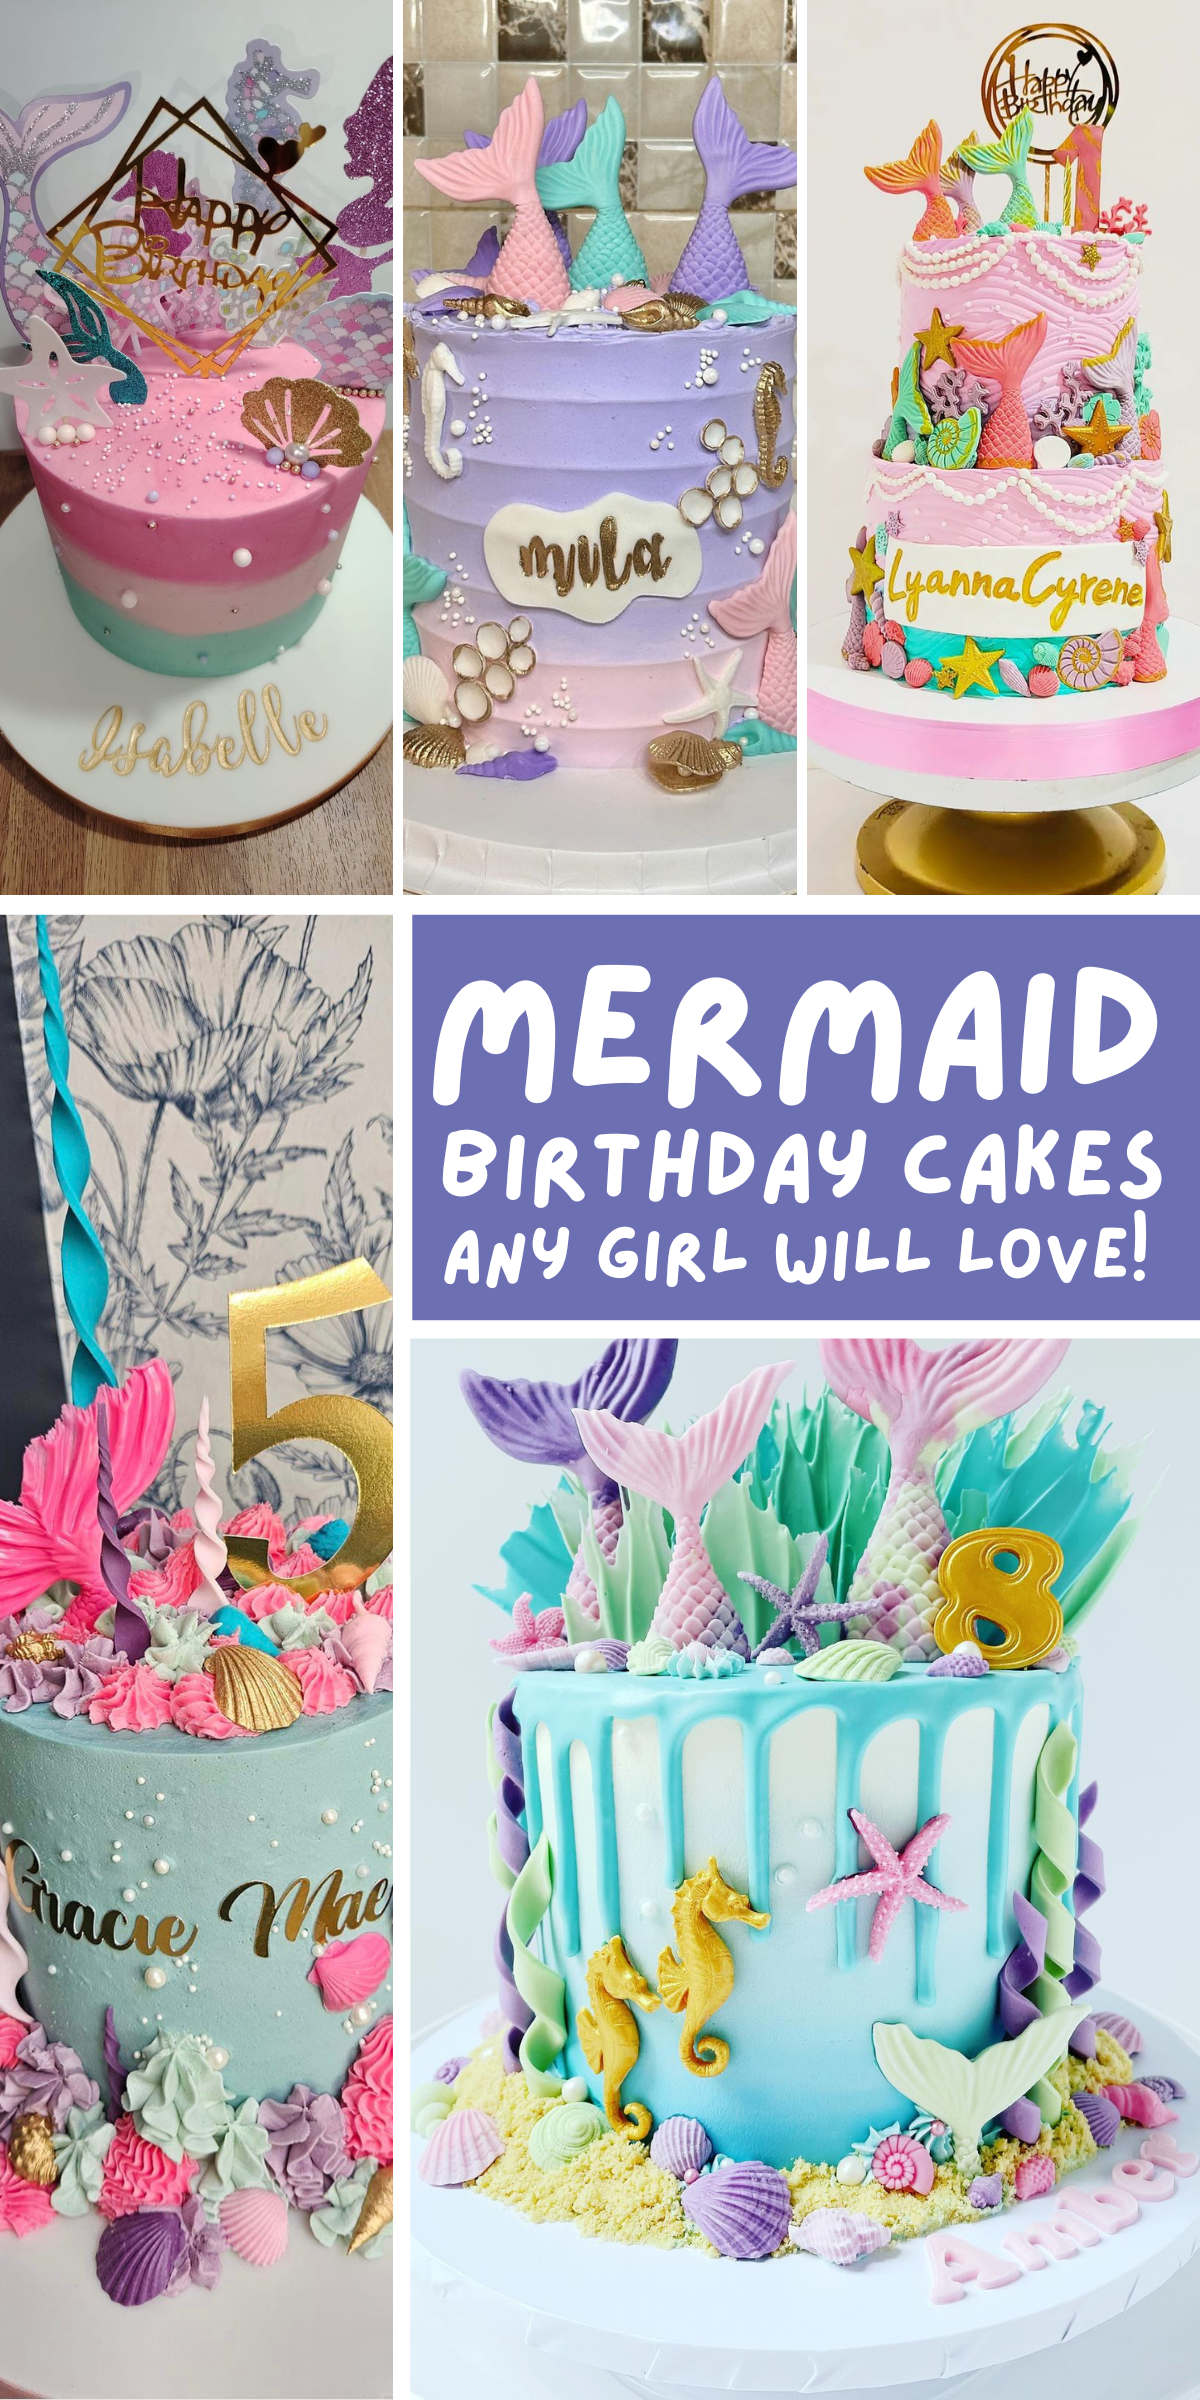 🧜🏻‍♀️🐚🎂 Bring the enchantment of the underwater world to life with these creative and magical cake ideas for an unforgettable celebration.